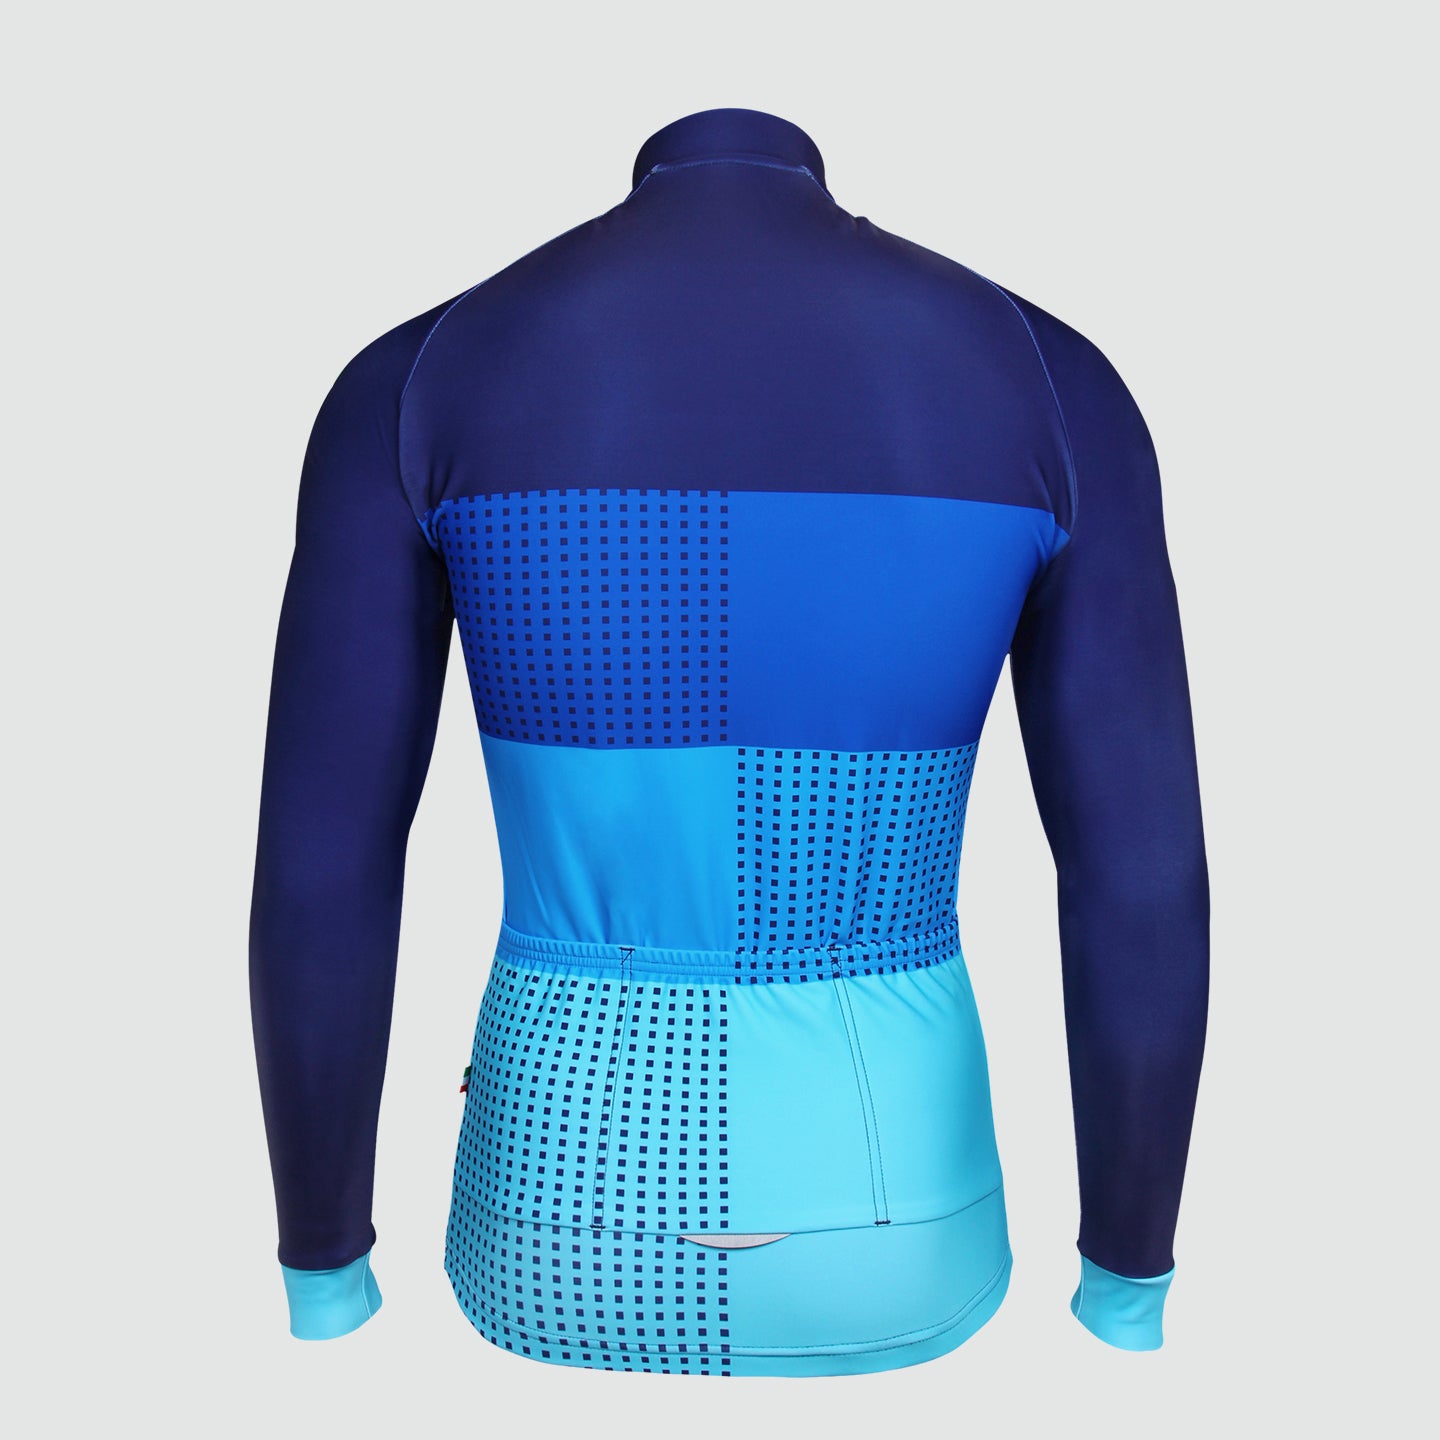 ALPINE THERMAL LONG SLEEVE CYCLING JERSEY